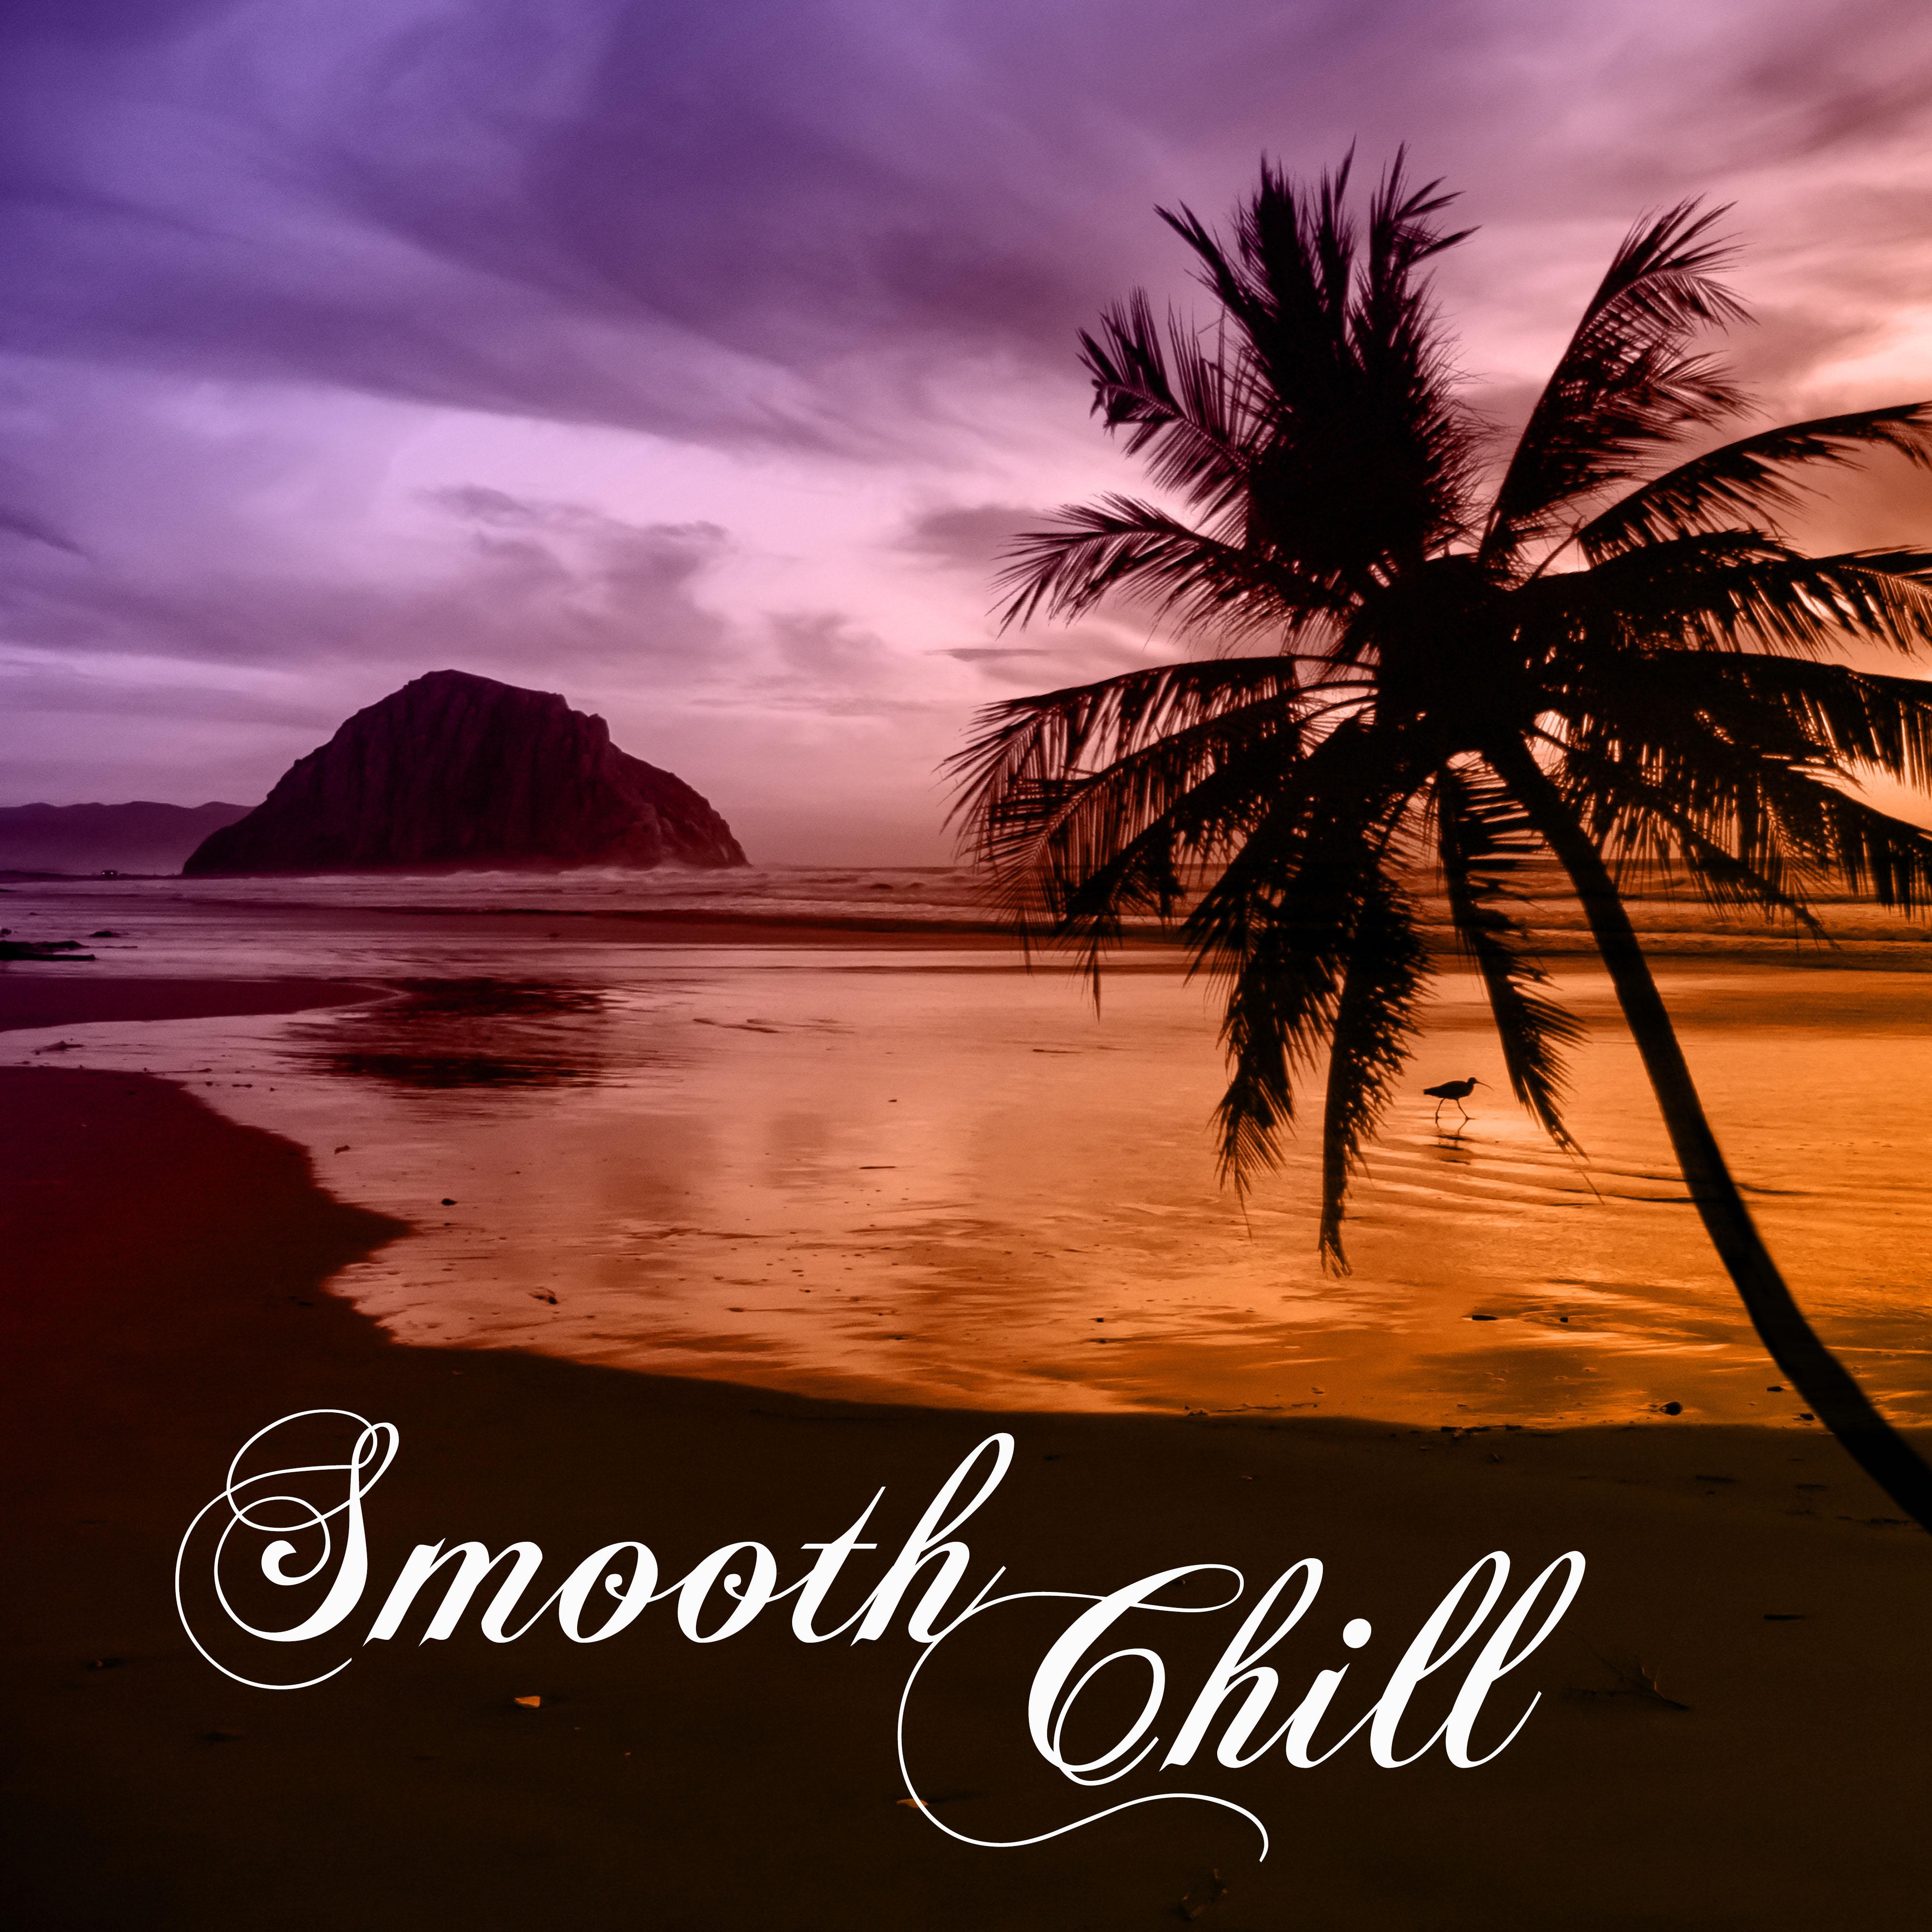 Smooth Chill – Sun Music, Summer Time, Relax on The Beach, Chill Out Music